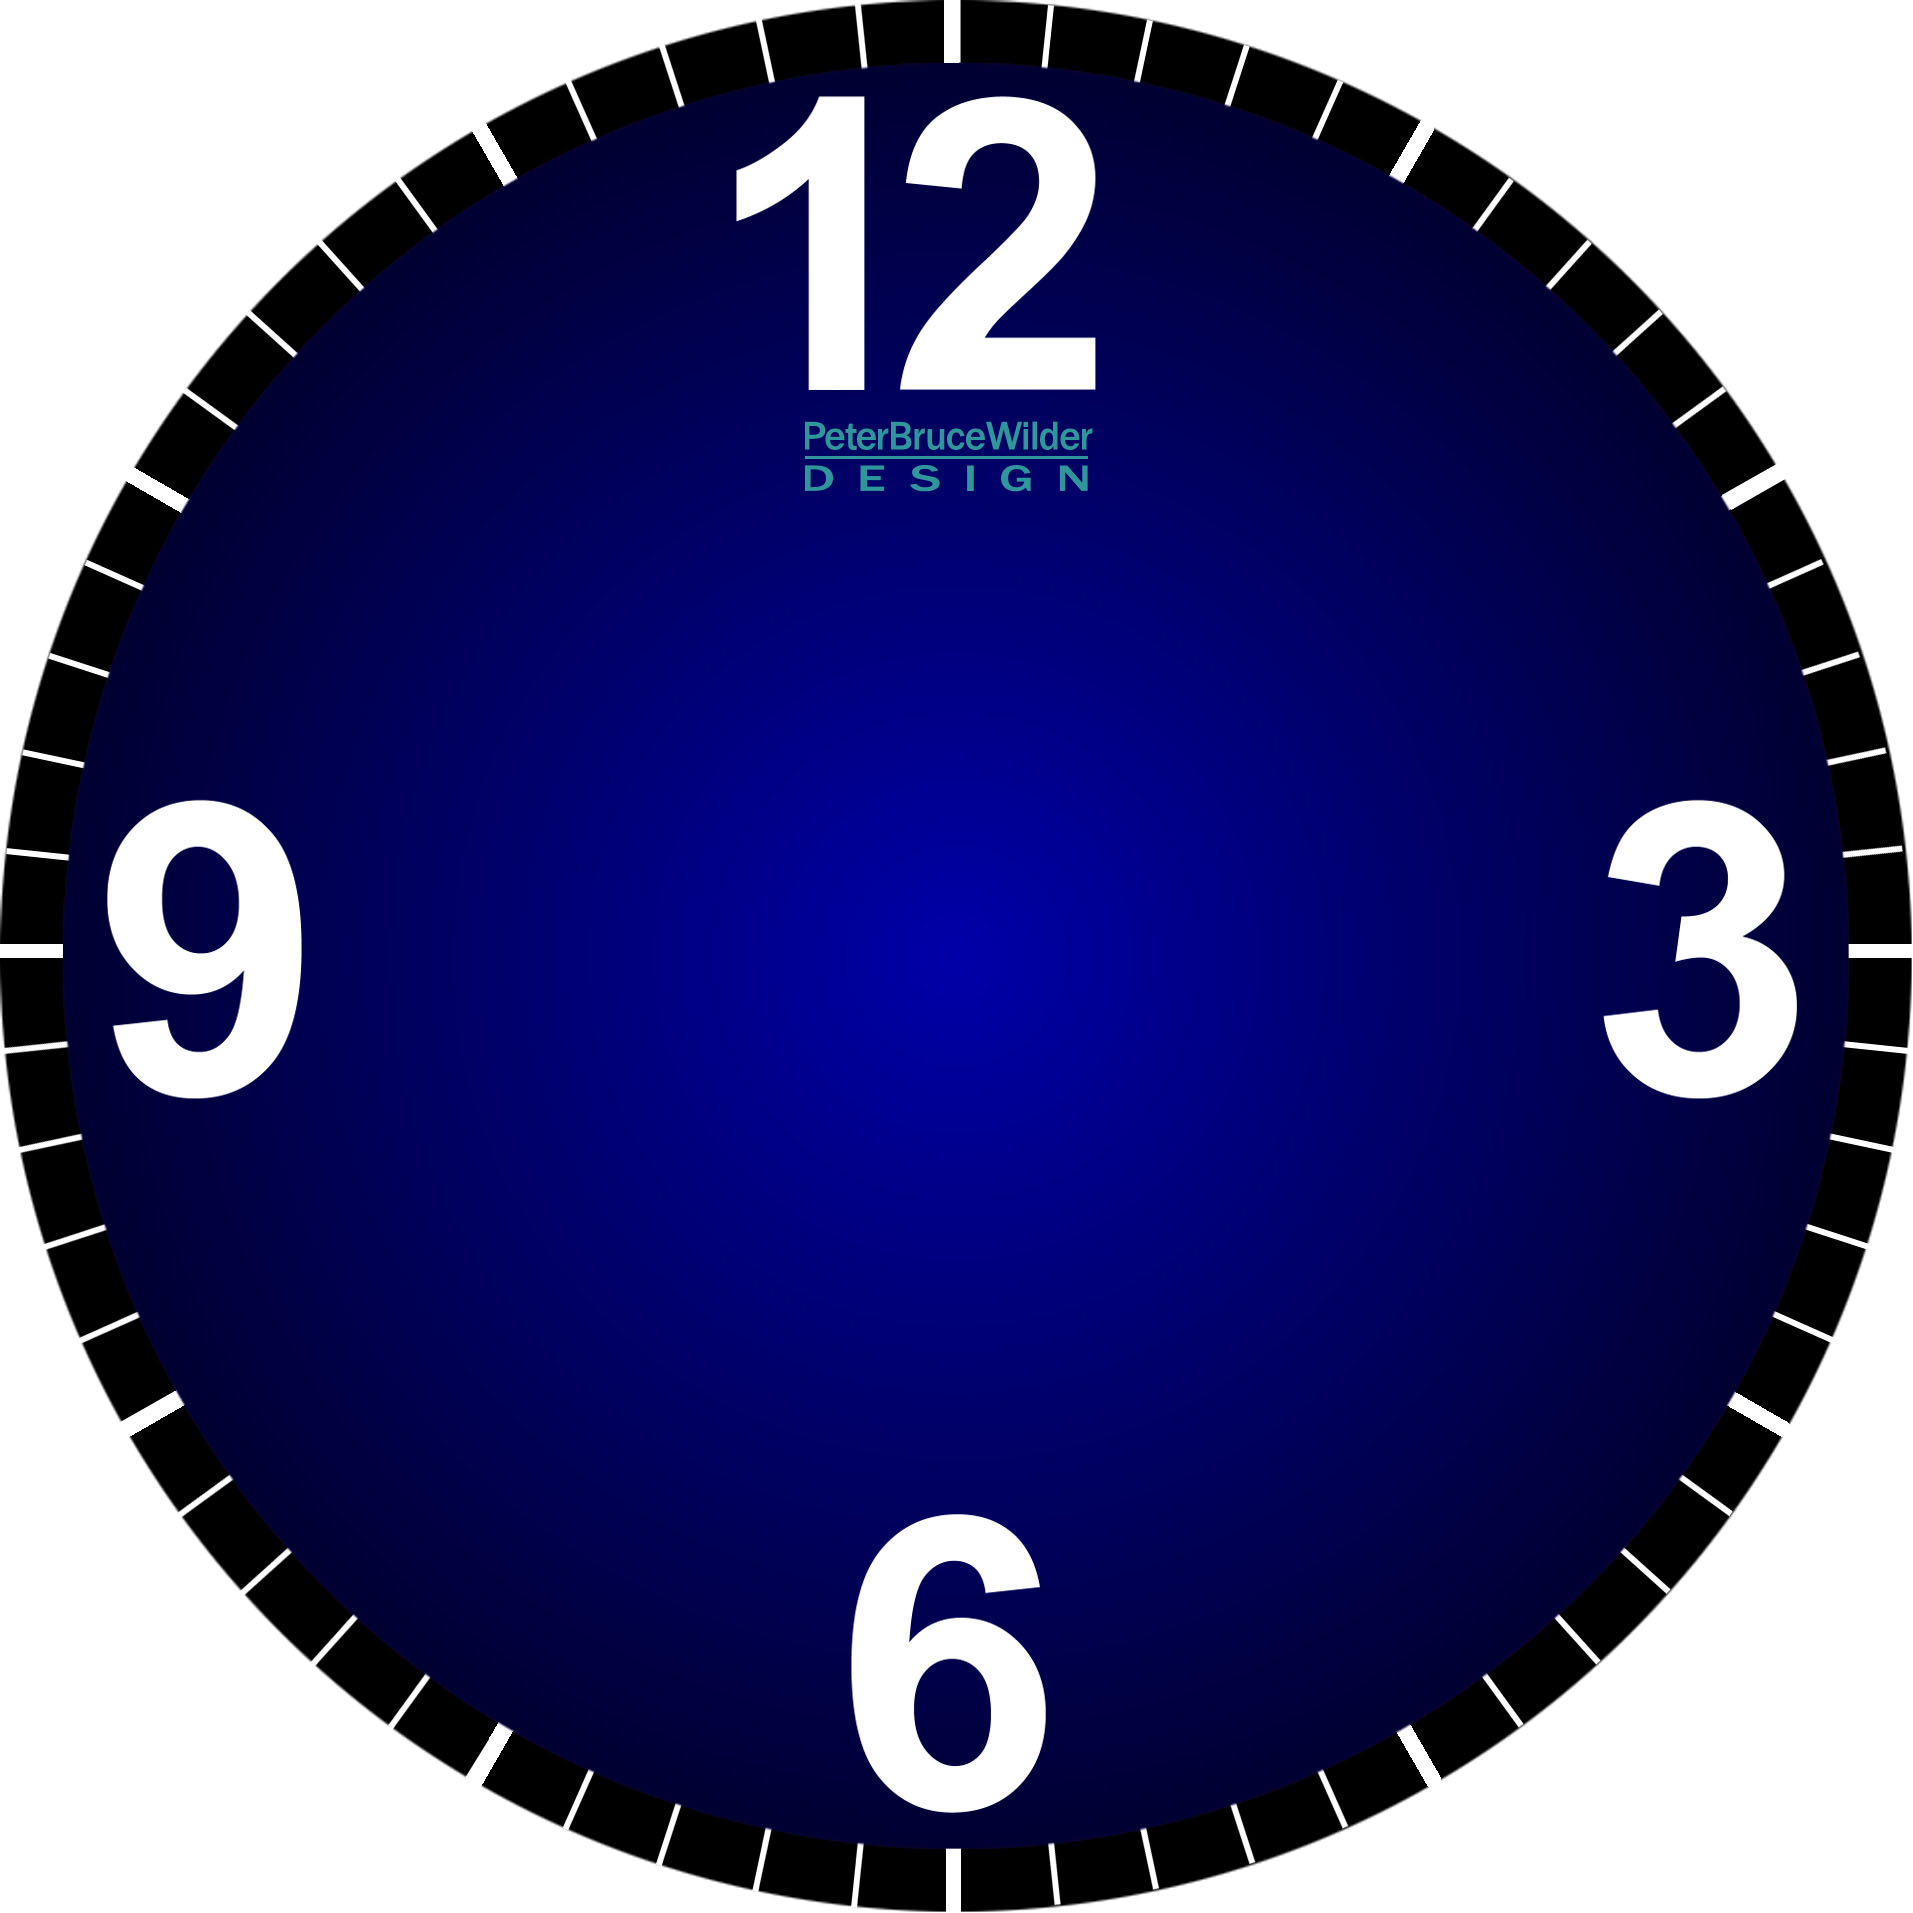 Printable Analog Clock Face   Clipart Best